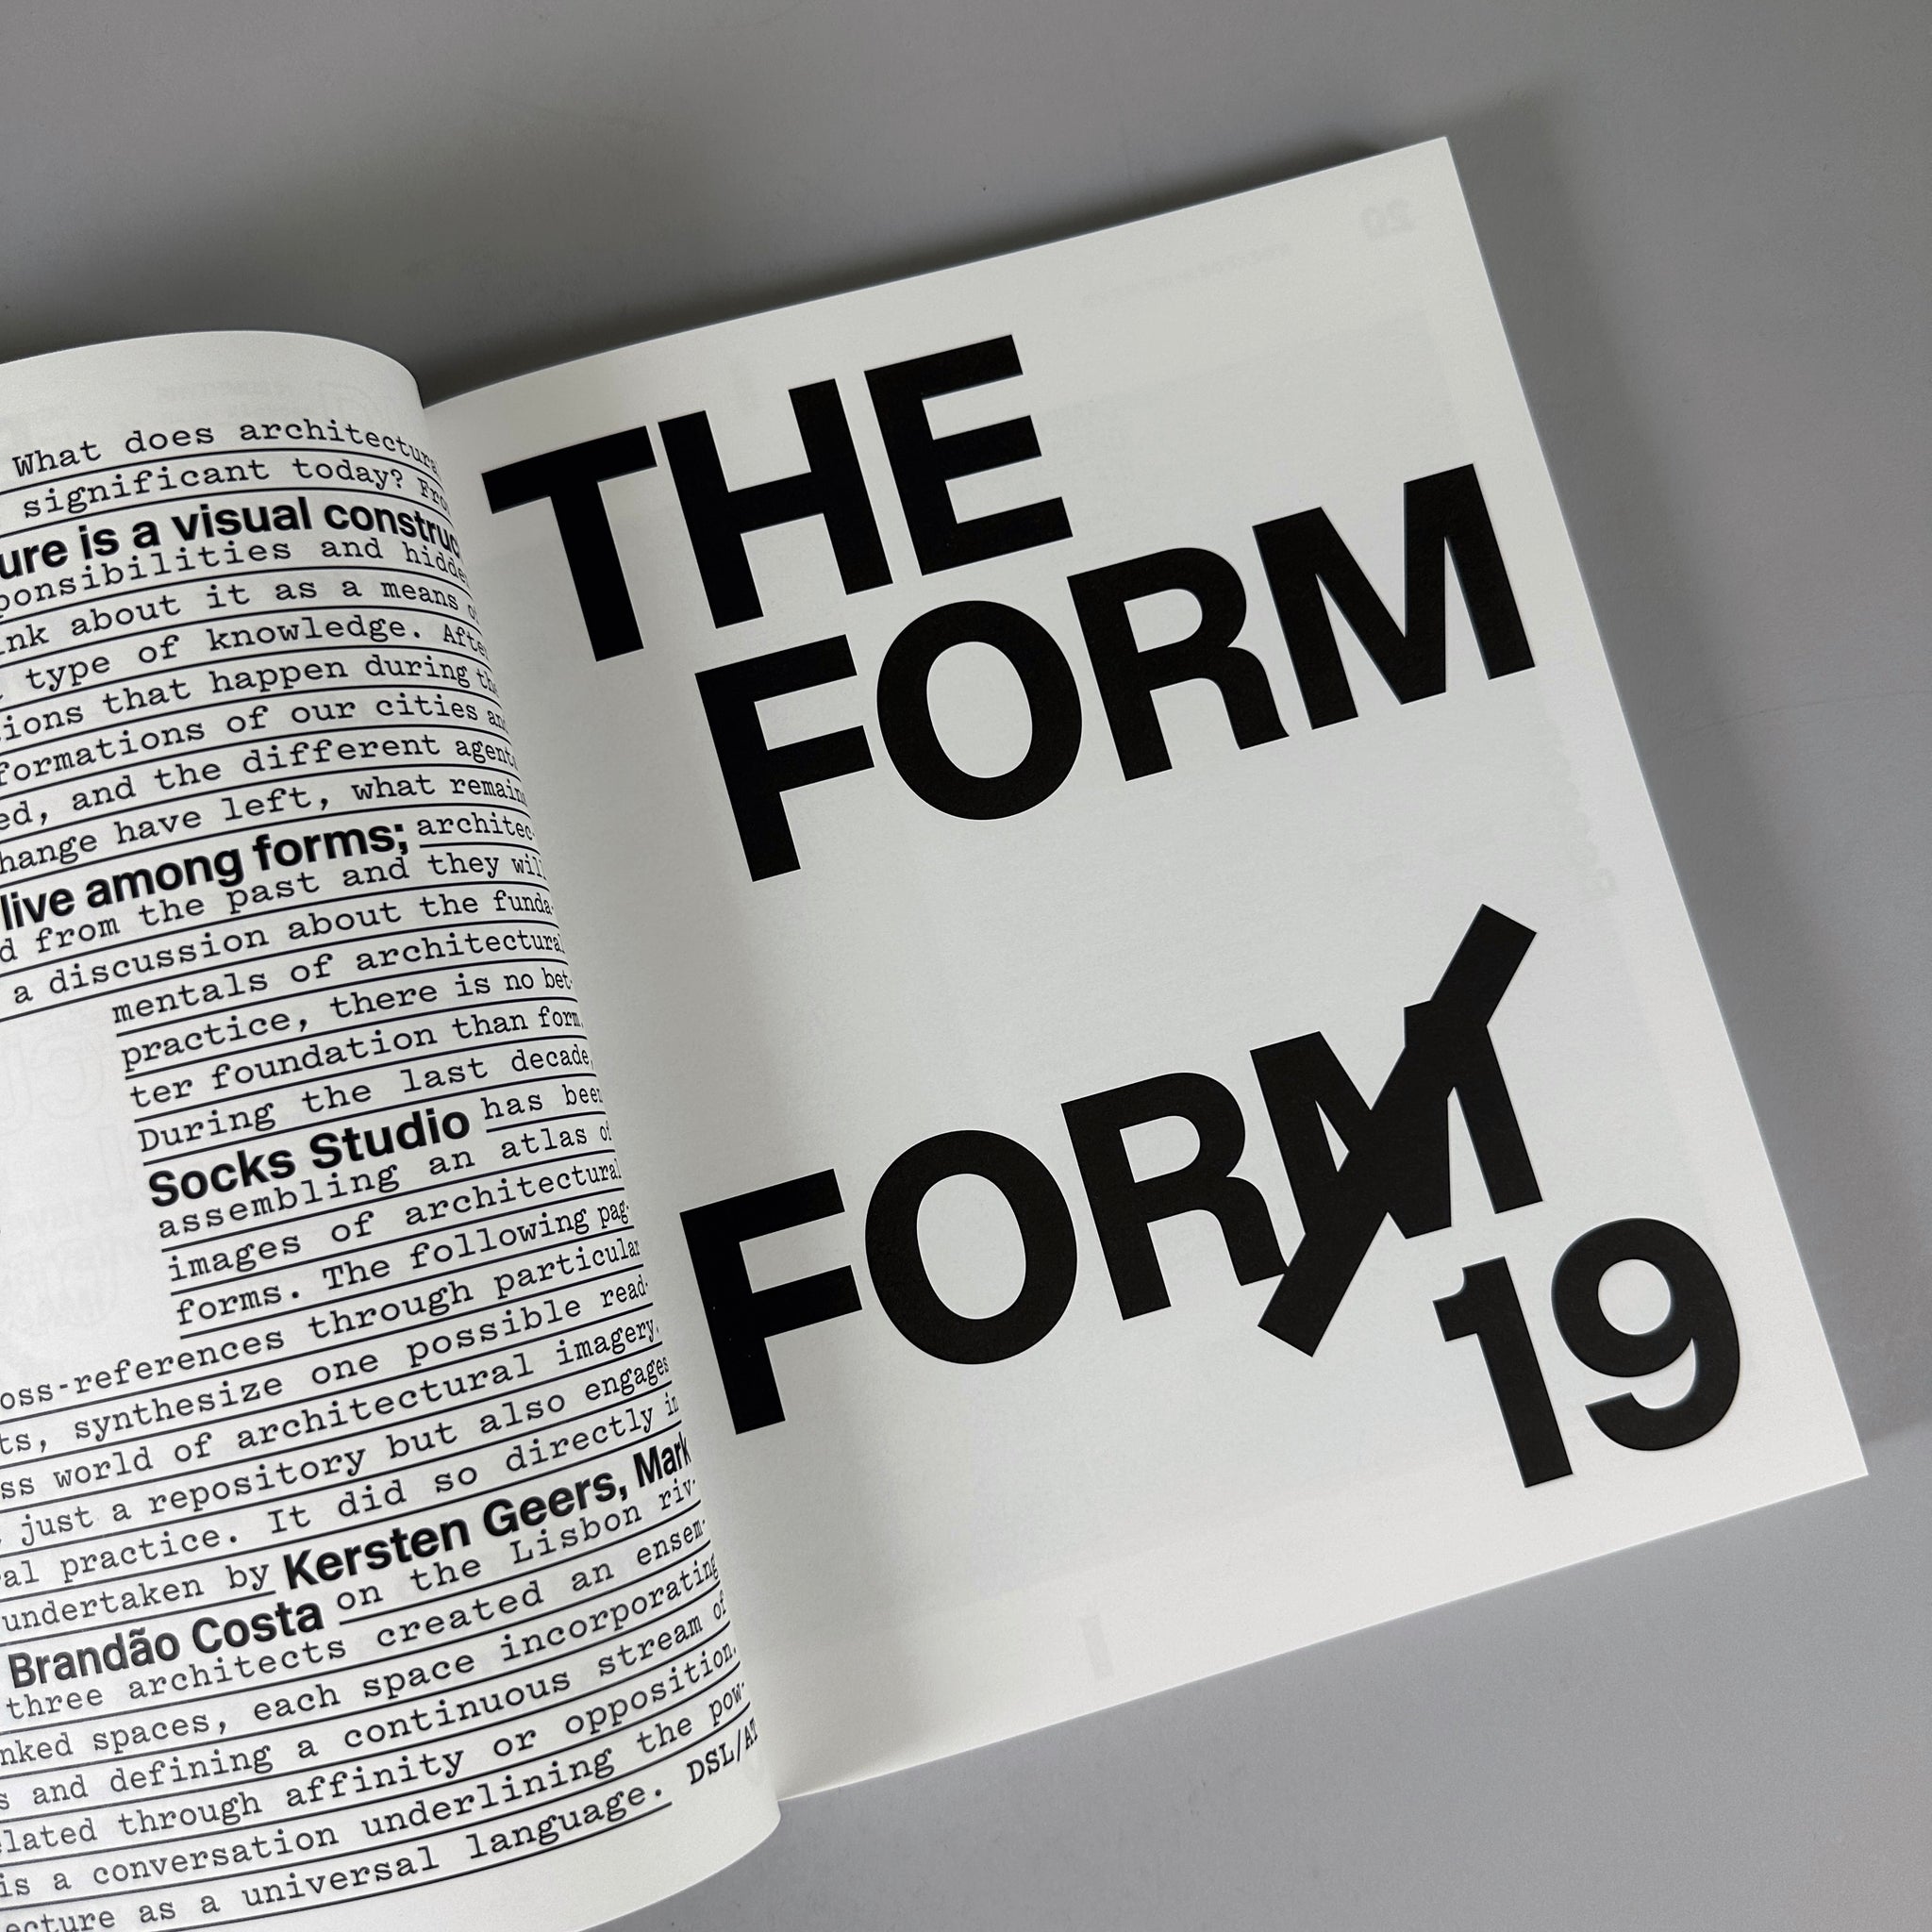 The Form of Form